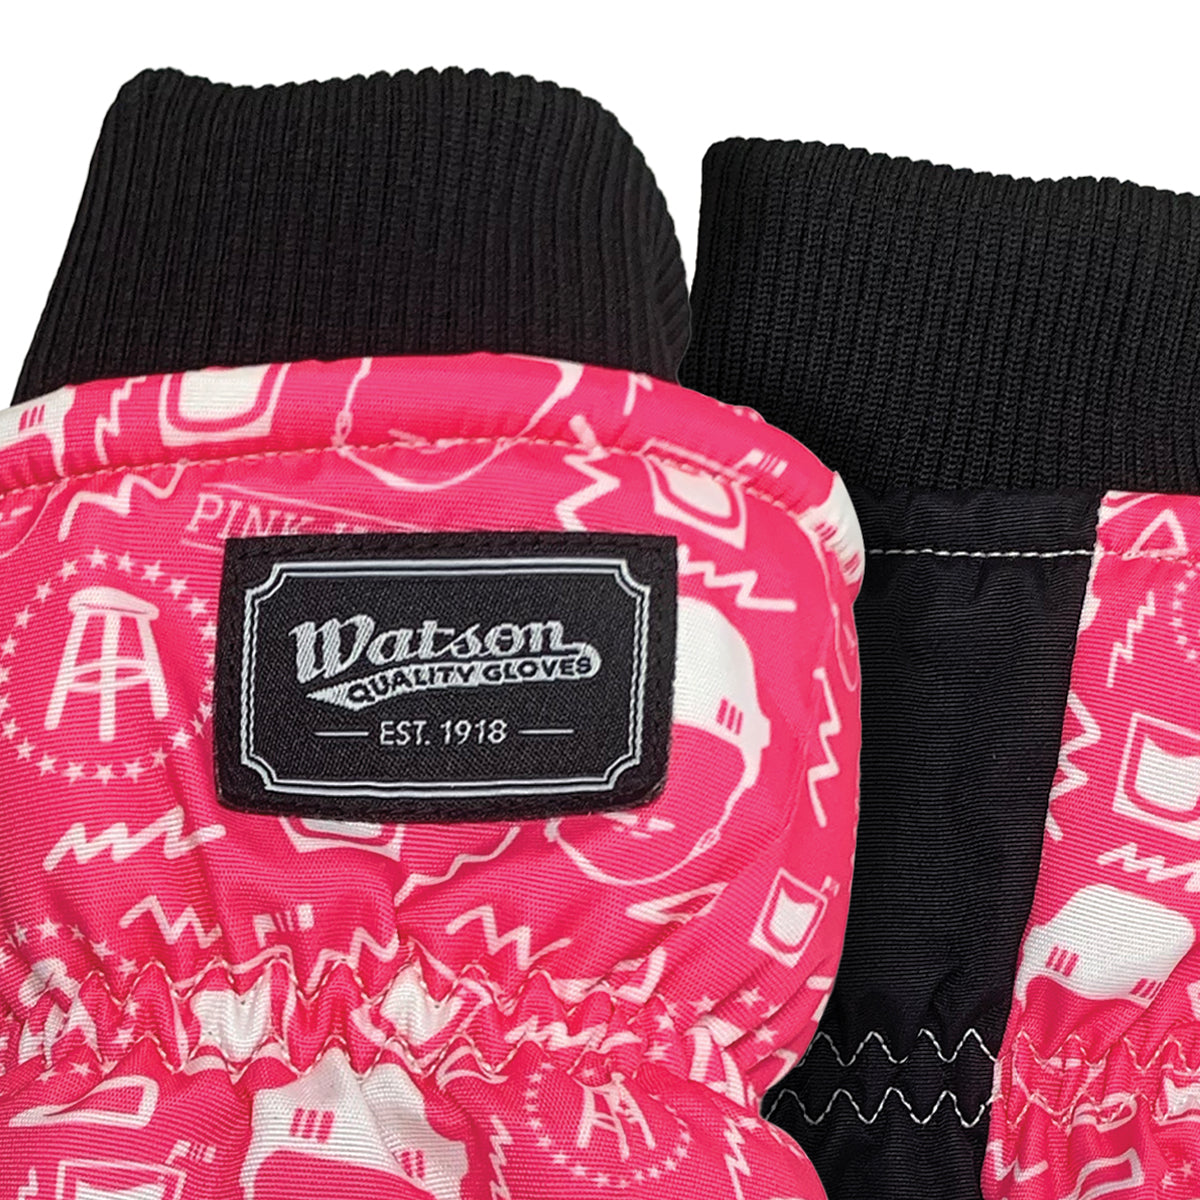 Watson Gloves x Pink Whitney Winter Mitts-Winter Accessories-Pink Whitney-Barstool Sports